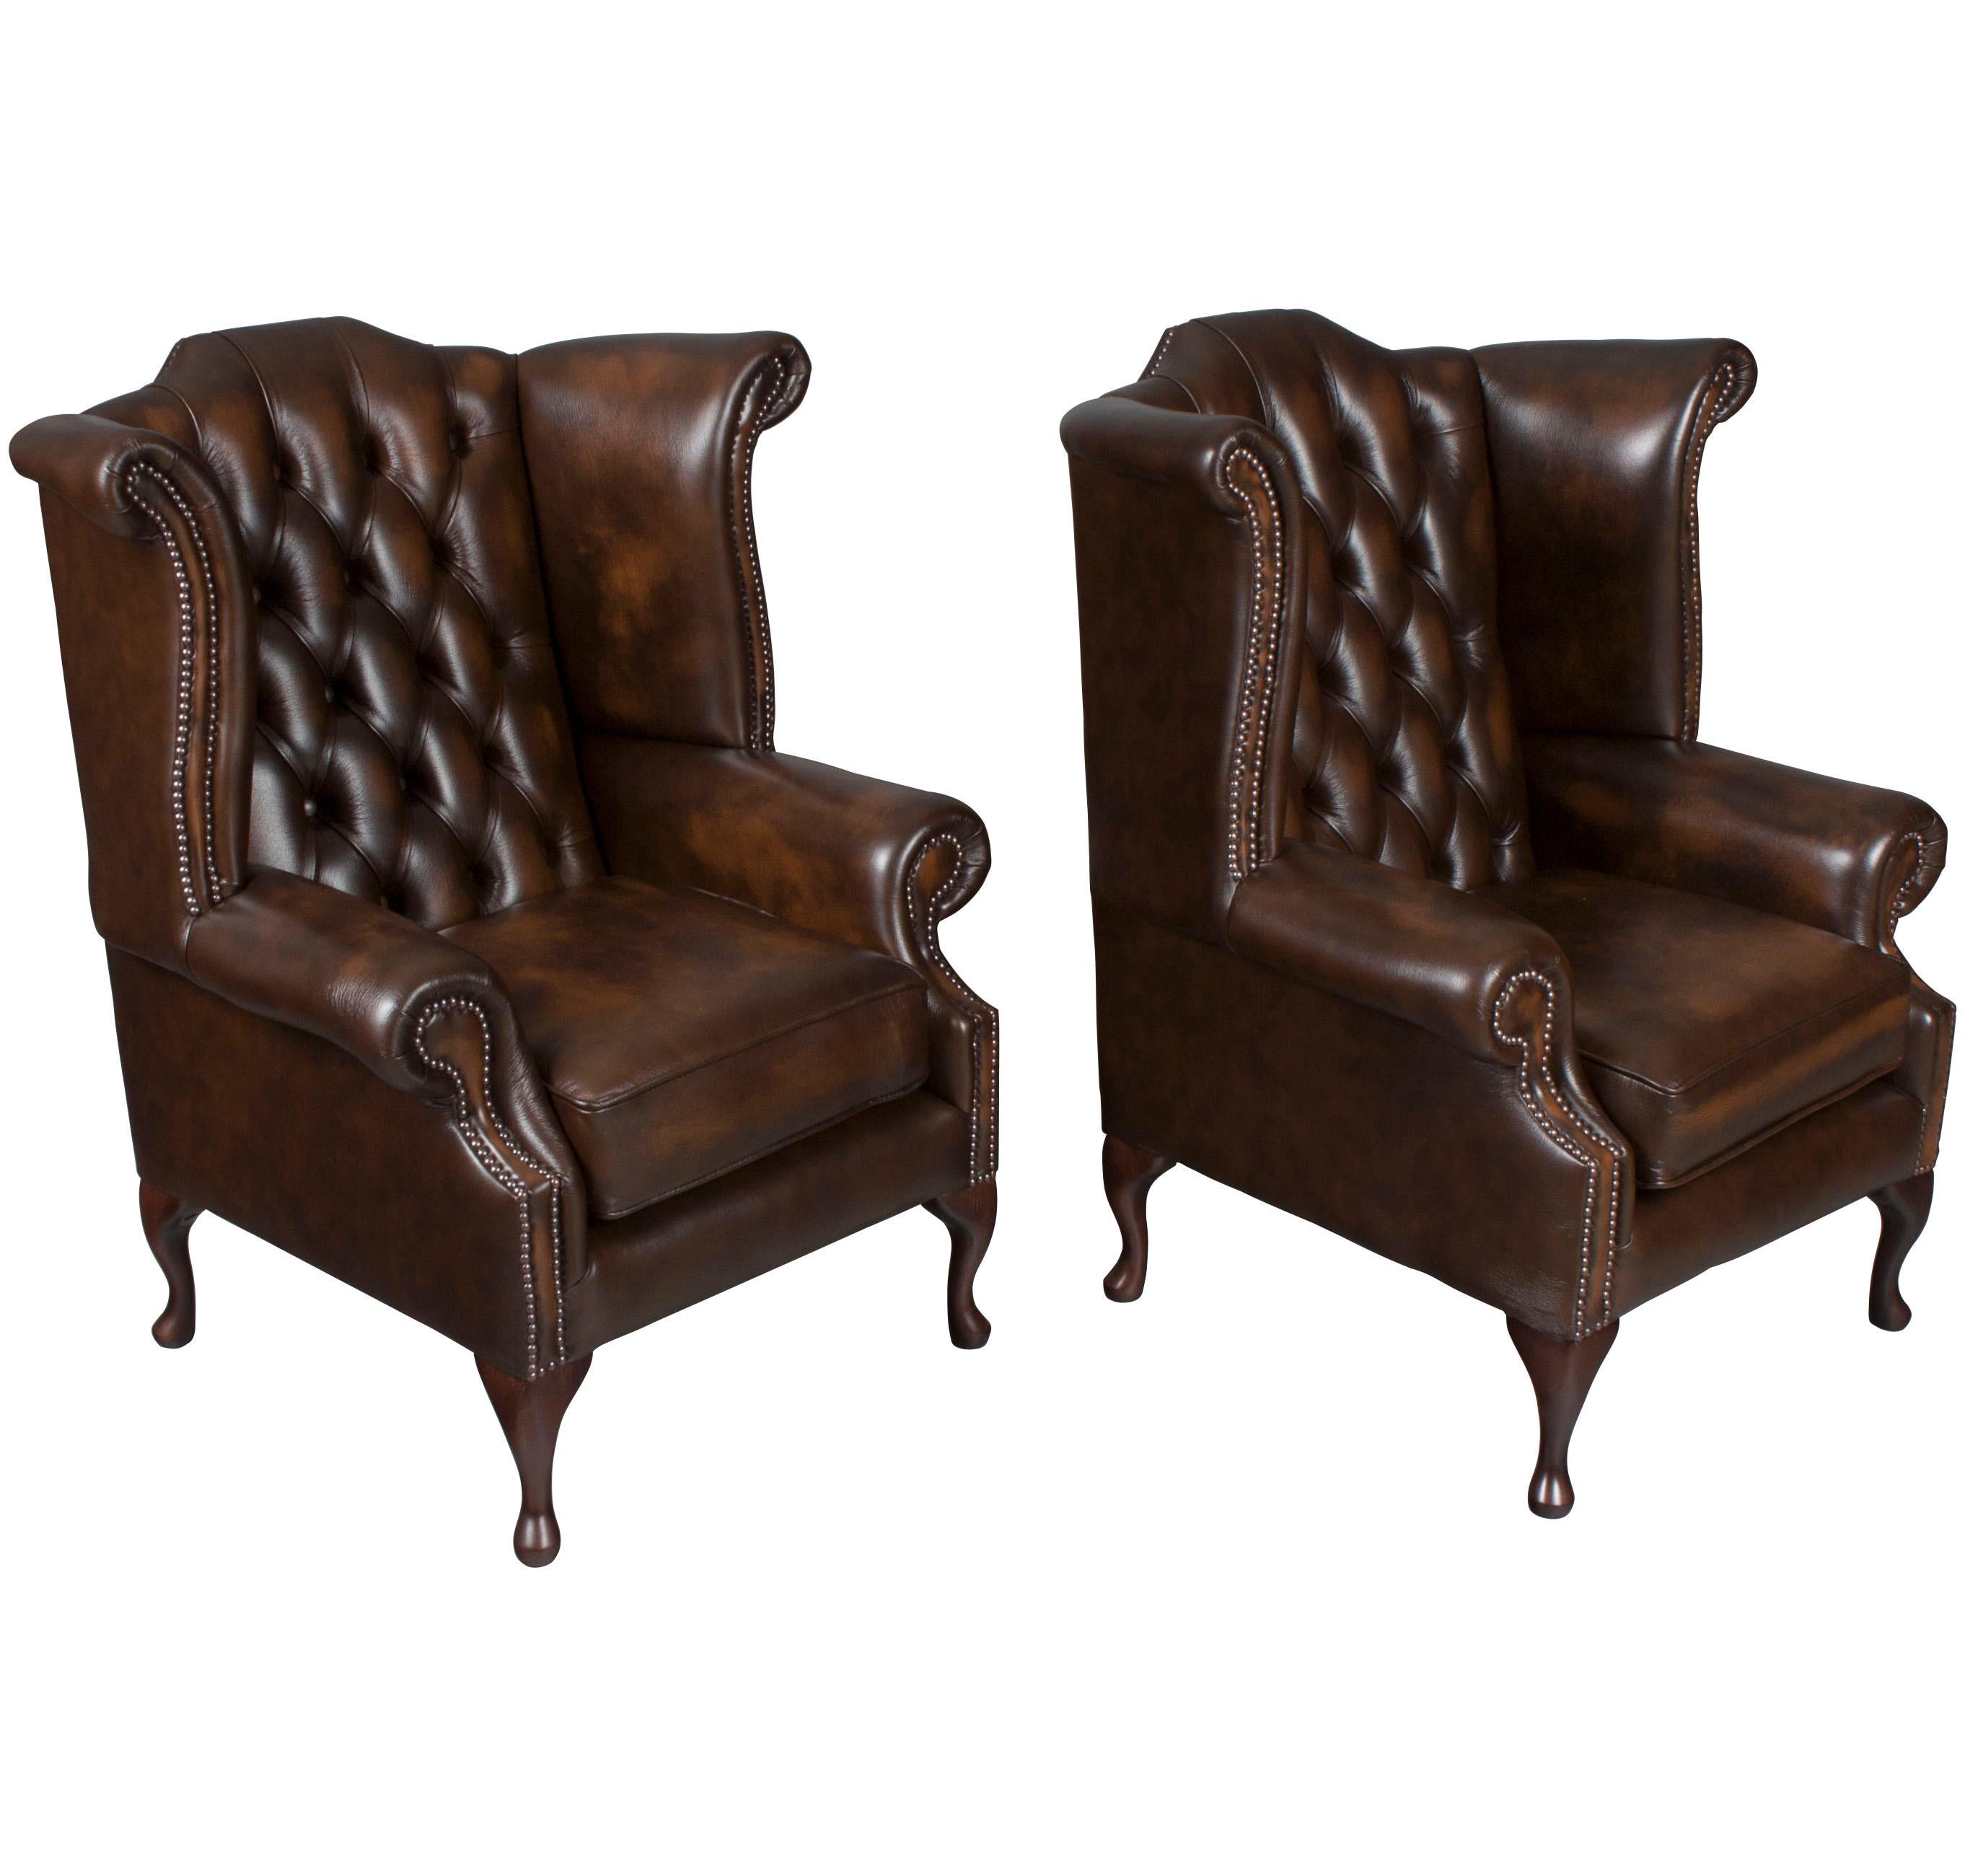 This is a brand new set of handmade tufted leather wing back arm chairs from England. 

The brown tufted leather used is a genuine, semi-aniline dyed leather. The maker expertly antiques it to provide an aged look with lighter tones on the raised